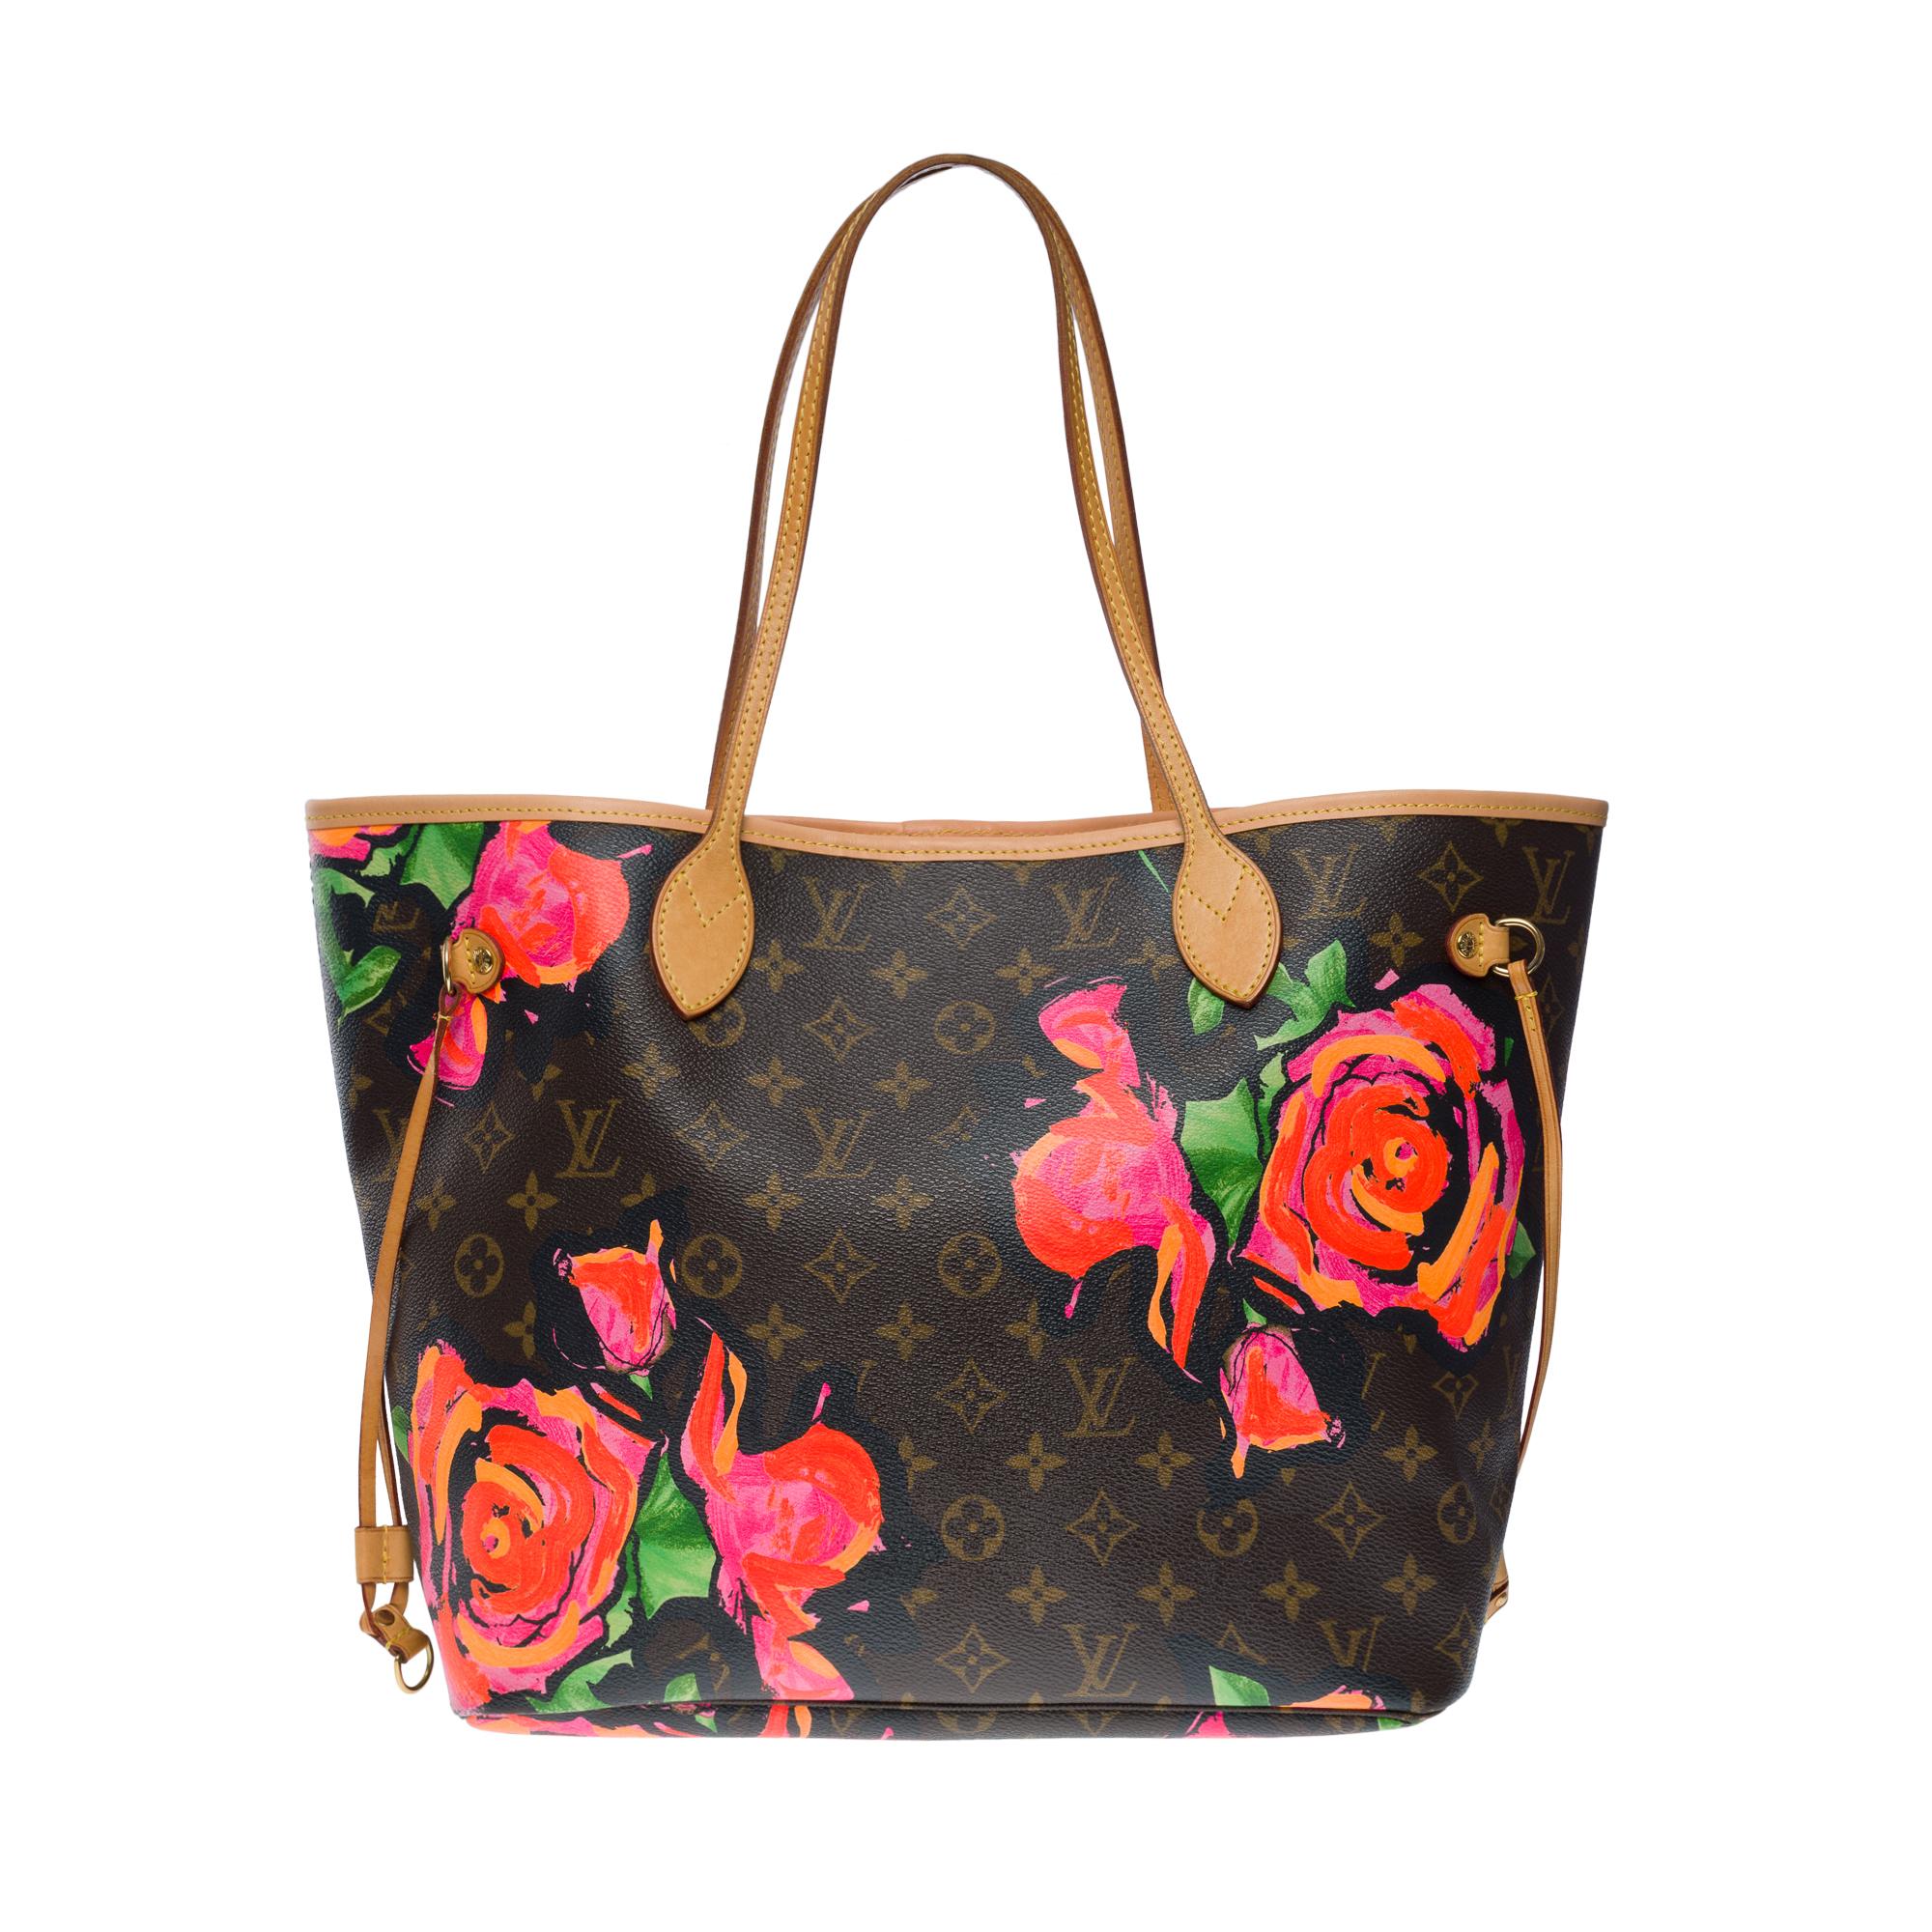 The Collector’s Louis Vuitton Neverfull MM Tote bag Roses limited edition by Stephen Sprouse in brown monogram canvas with pink and natural leather motifs, gold metal hardware, double handle in natural leather allowing a hand or shoulder support

A